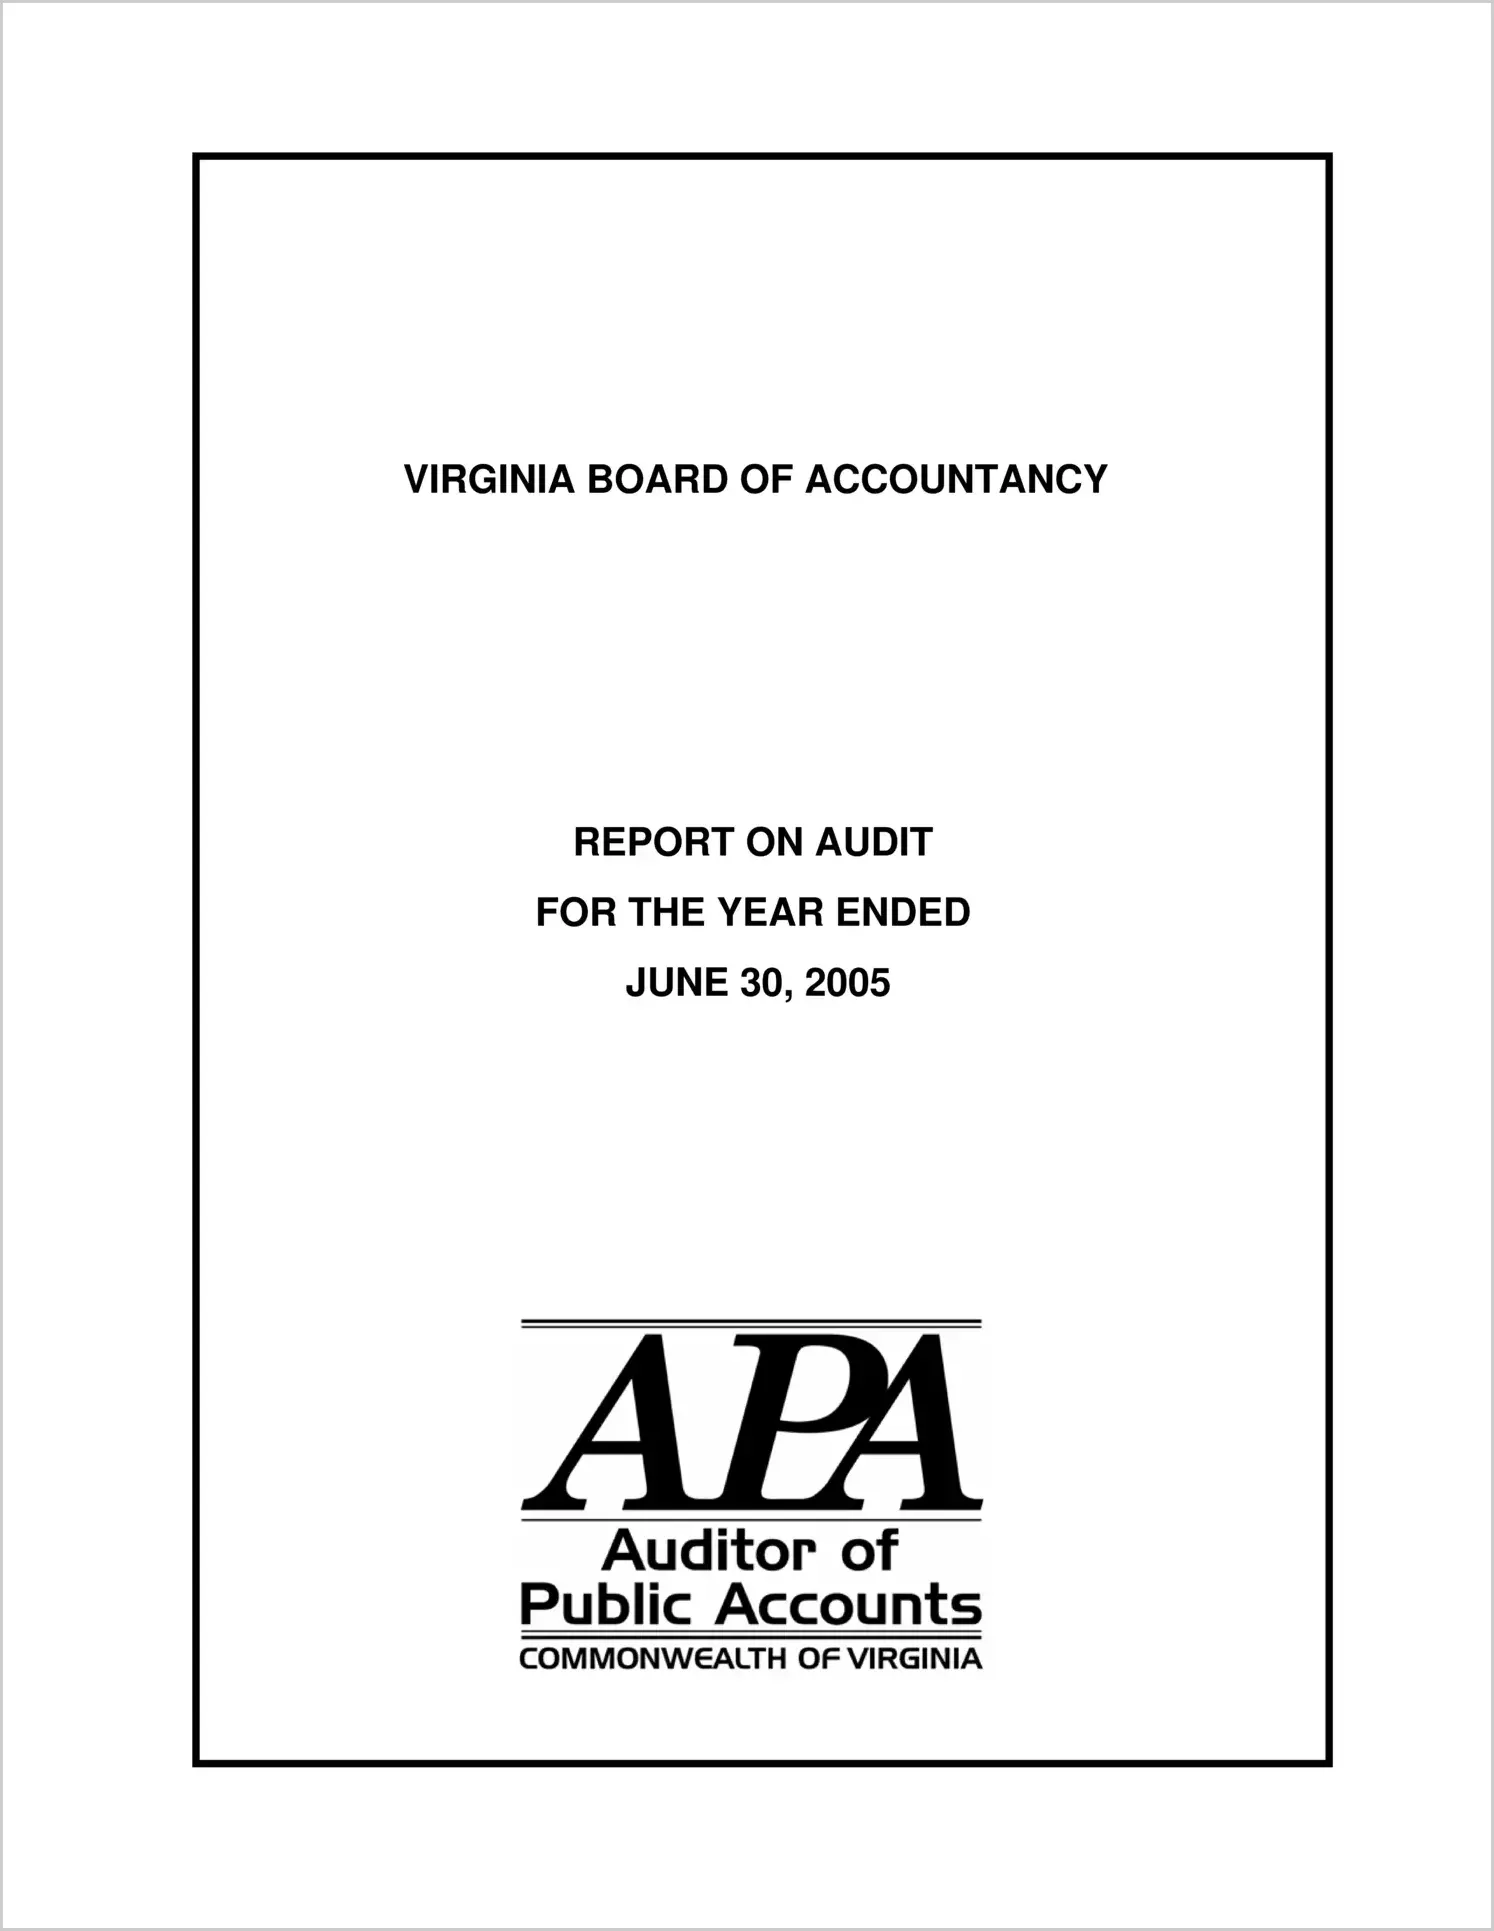 Virginia Board of Accountancy for the year ended June 30, 2005